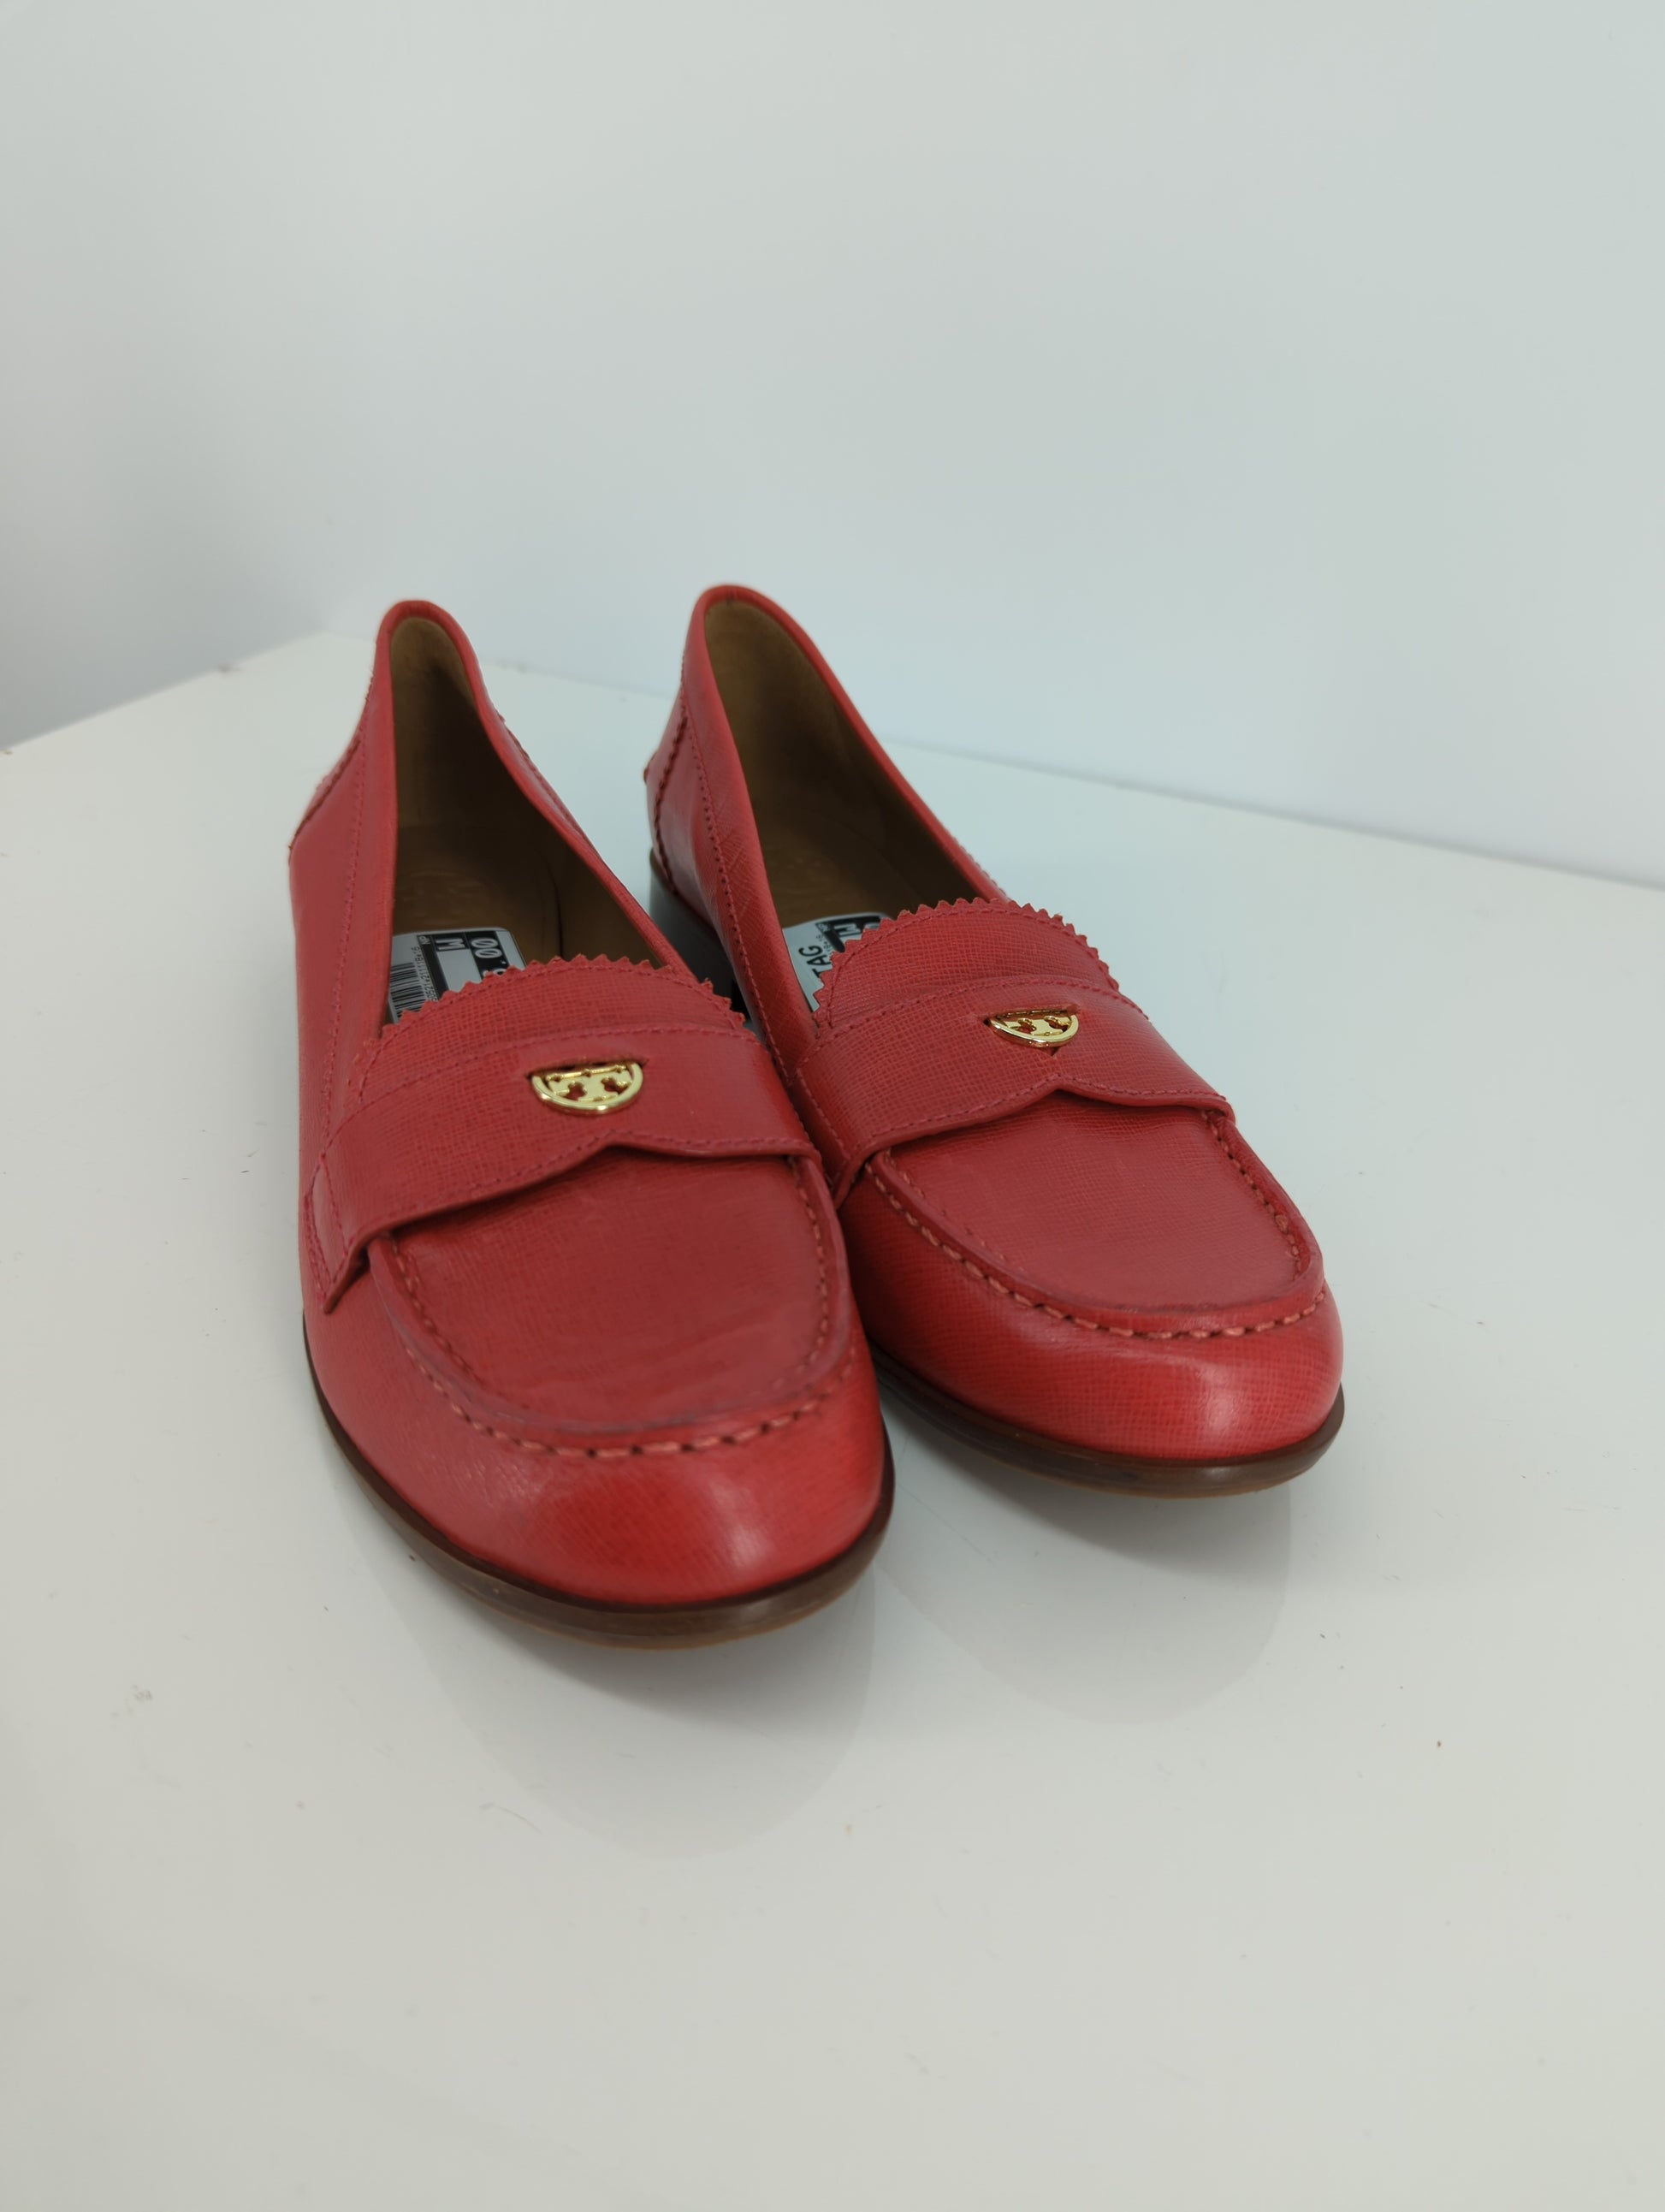 Shoes Flats By Tory Burch Size: 10 – Clothes Mentor Dublin OH #128